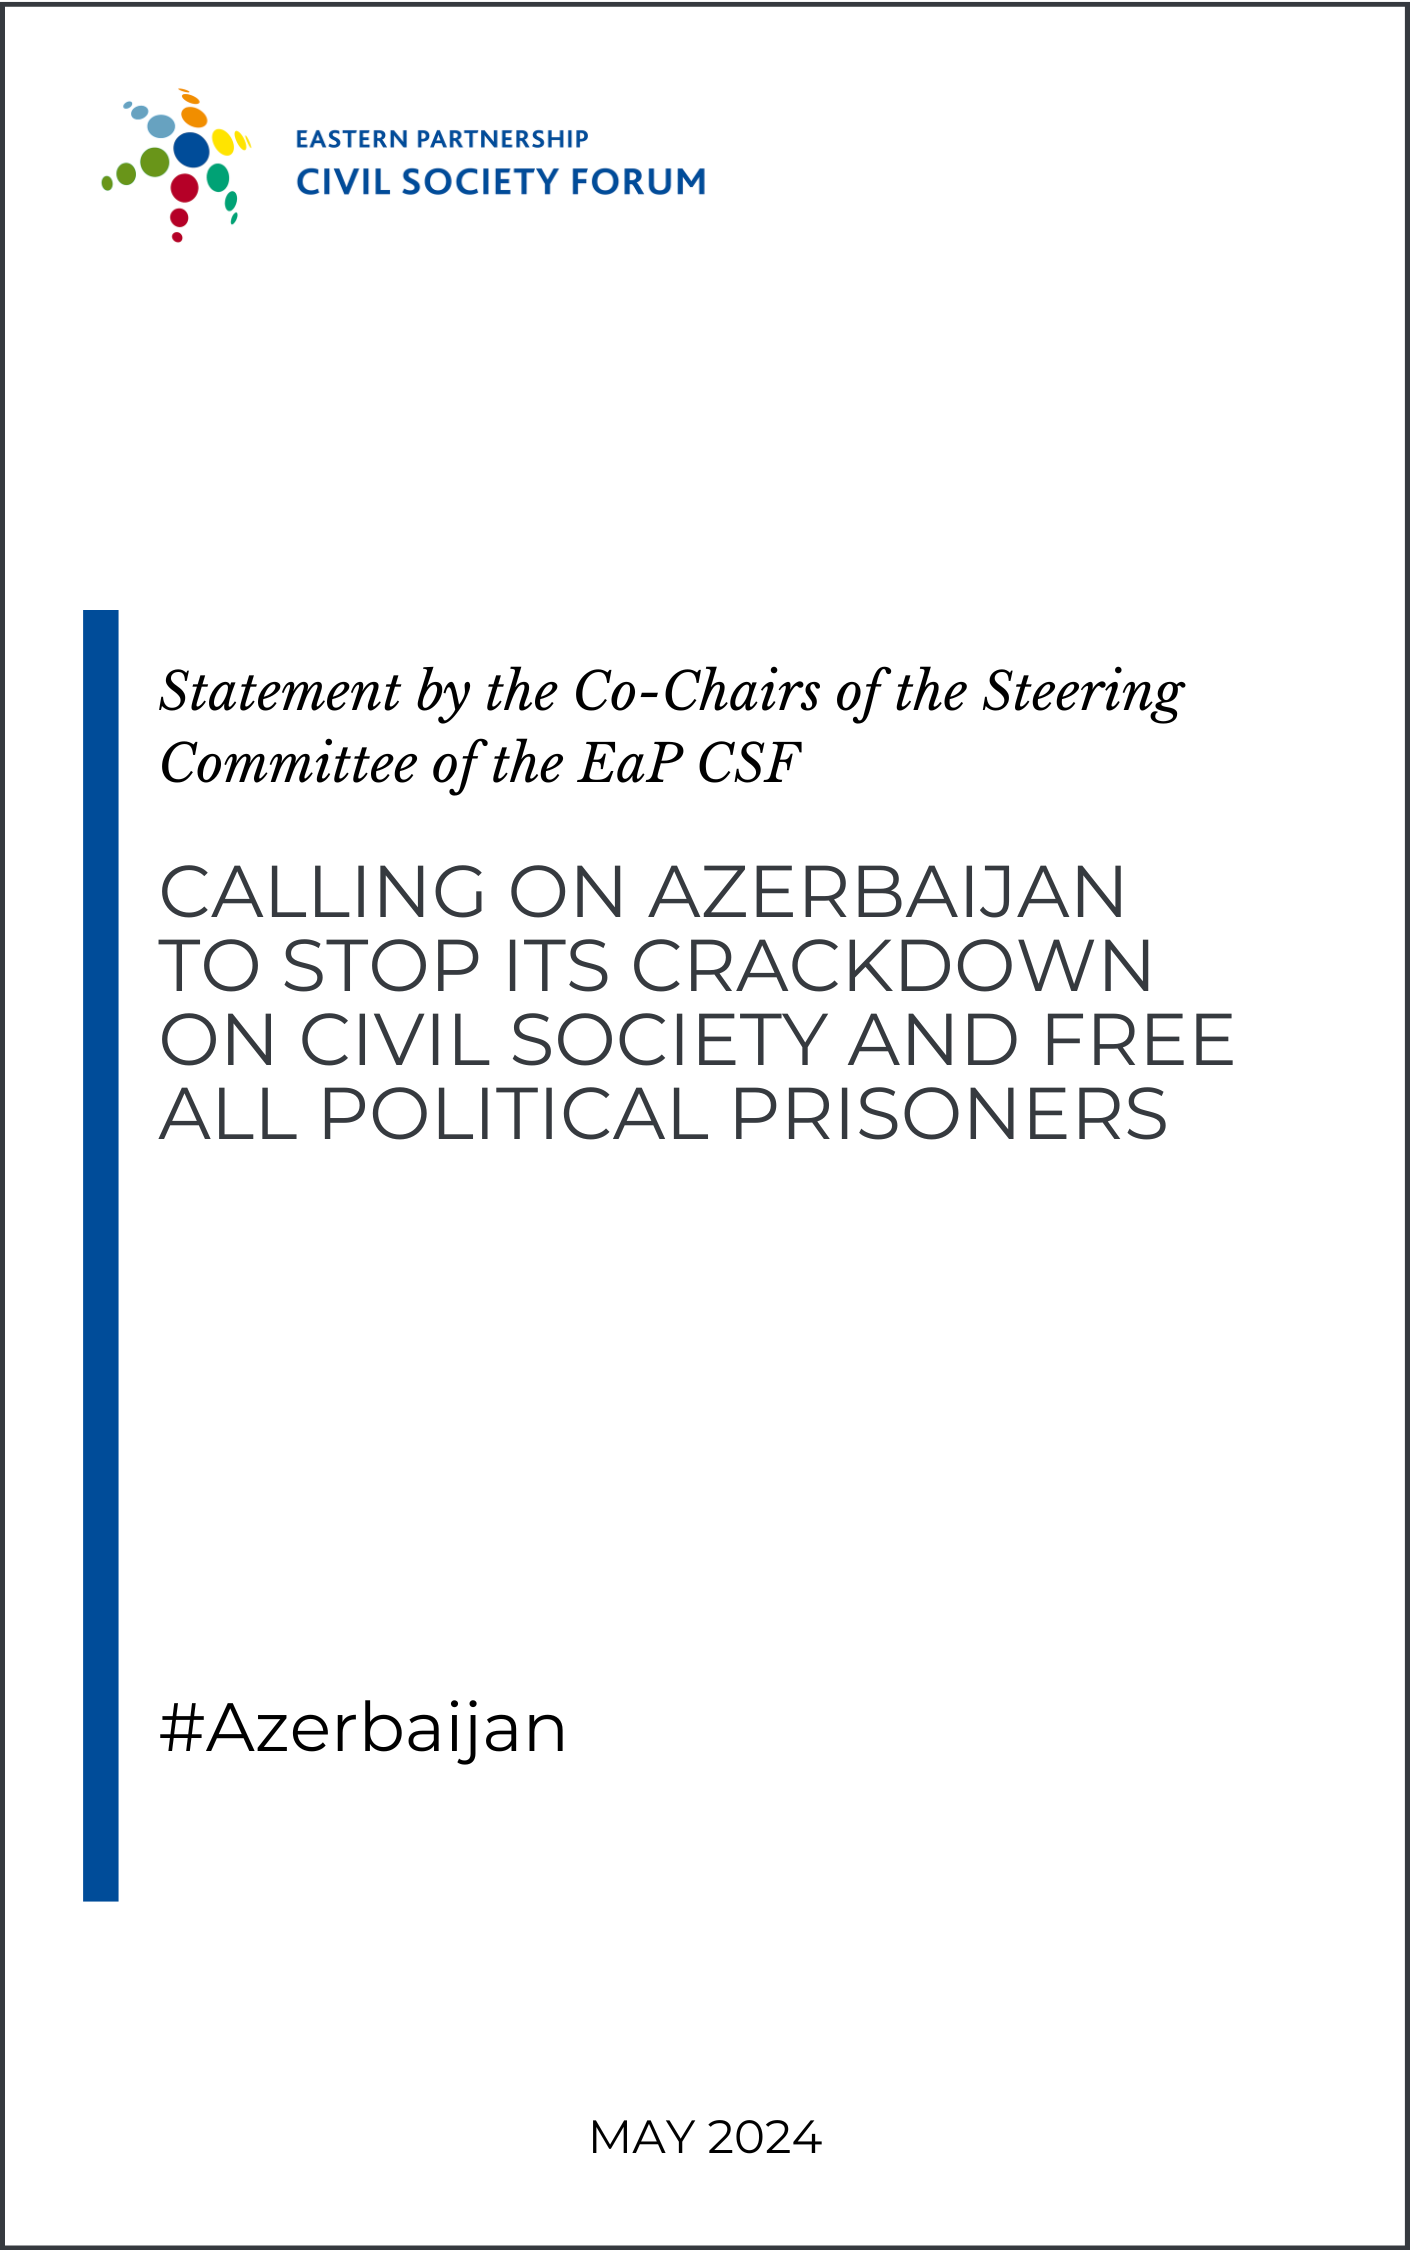 Azerbaijan must stop its crackdown on civil society and free all political prisoners